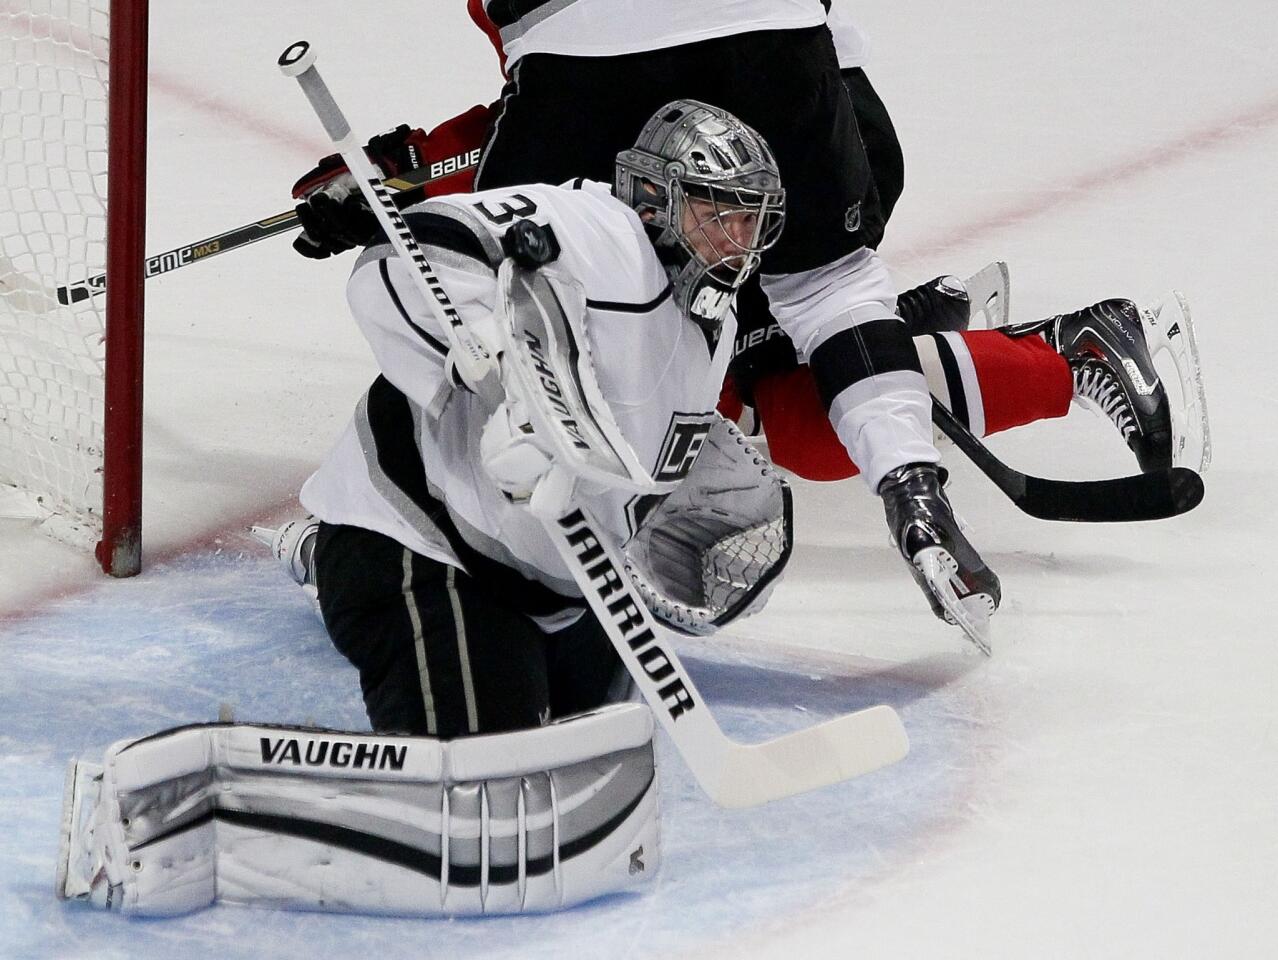 Kings goaltender Jonathan Quick blocks a shot by the Blackhawks with the pad on his right glove in the third period of Game 2 on Wednesday night in Chicago.